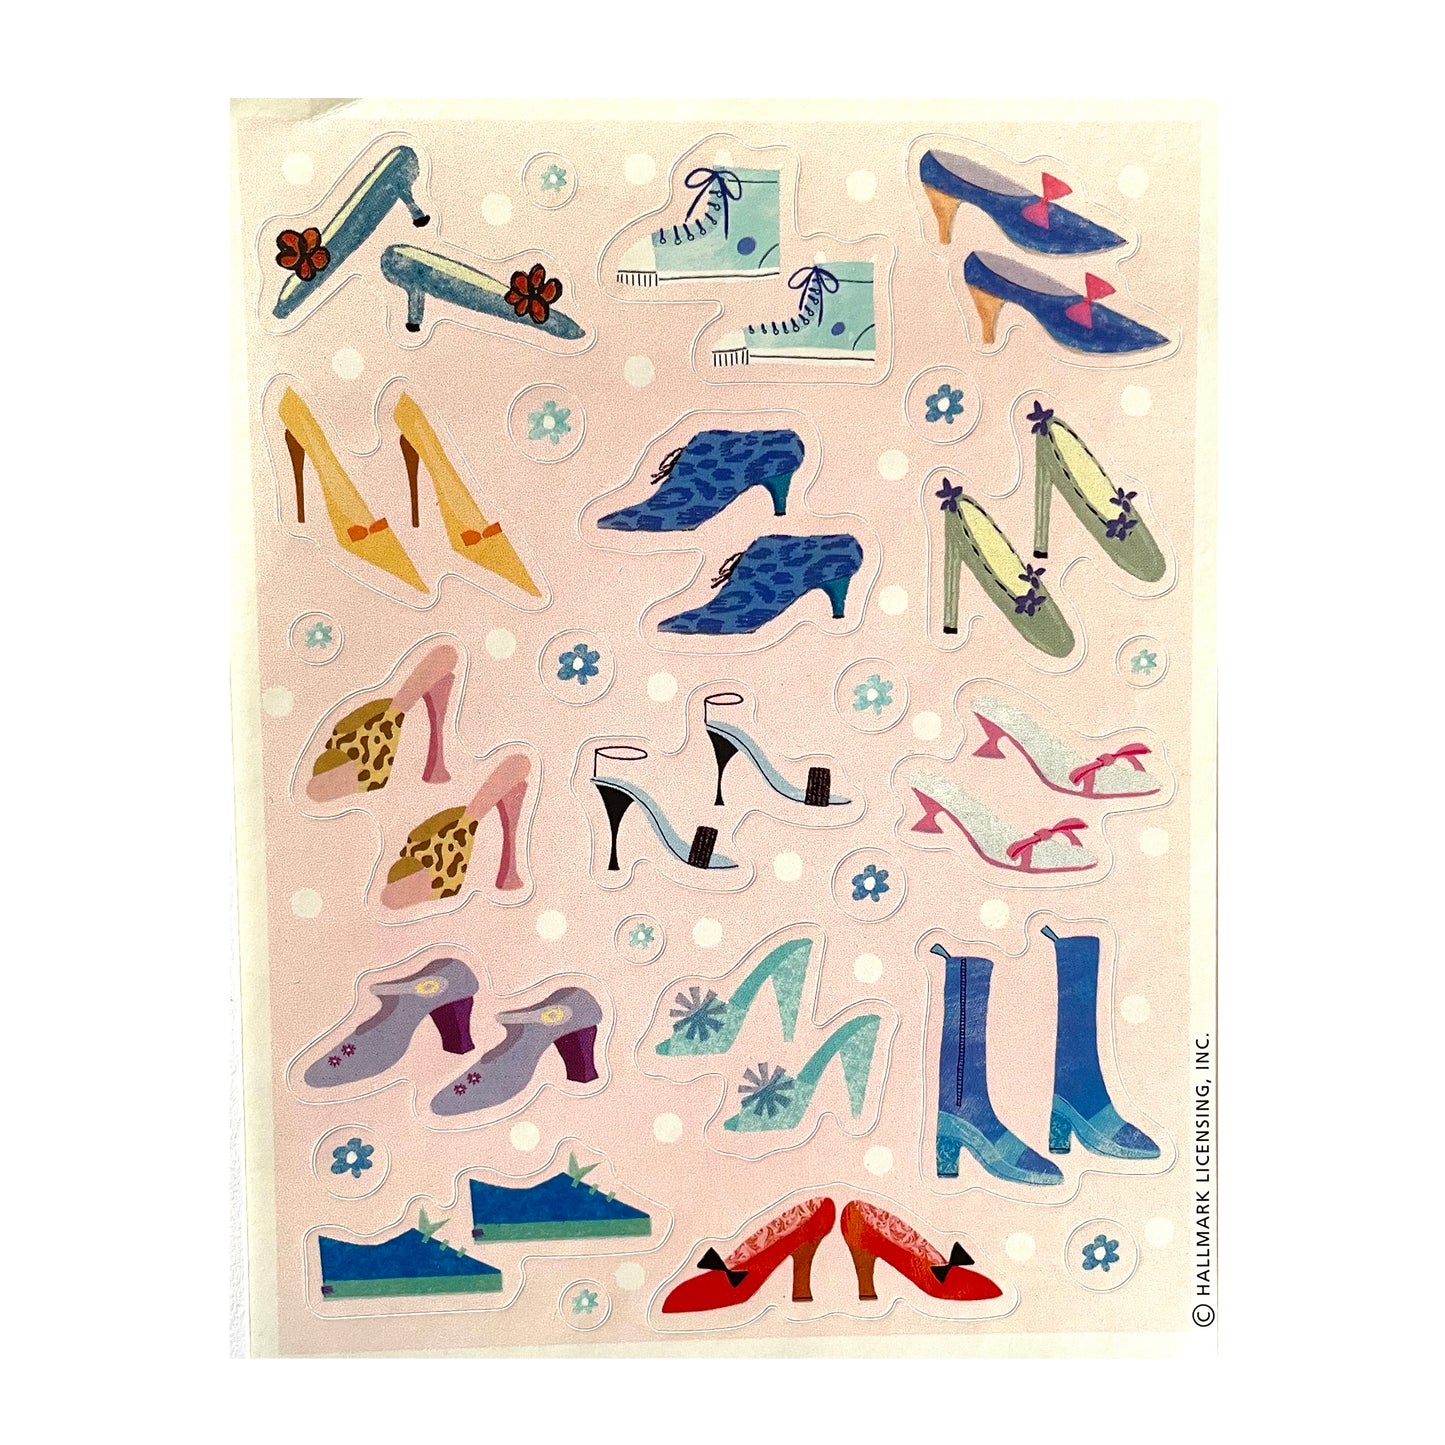 HALLMARK: Pair of Shoes Stickers